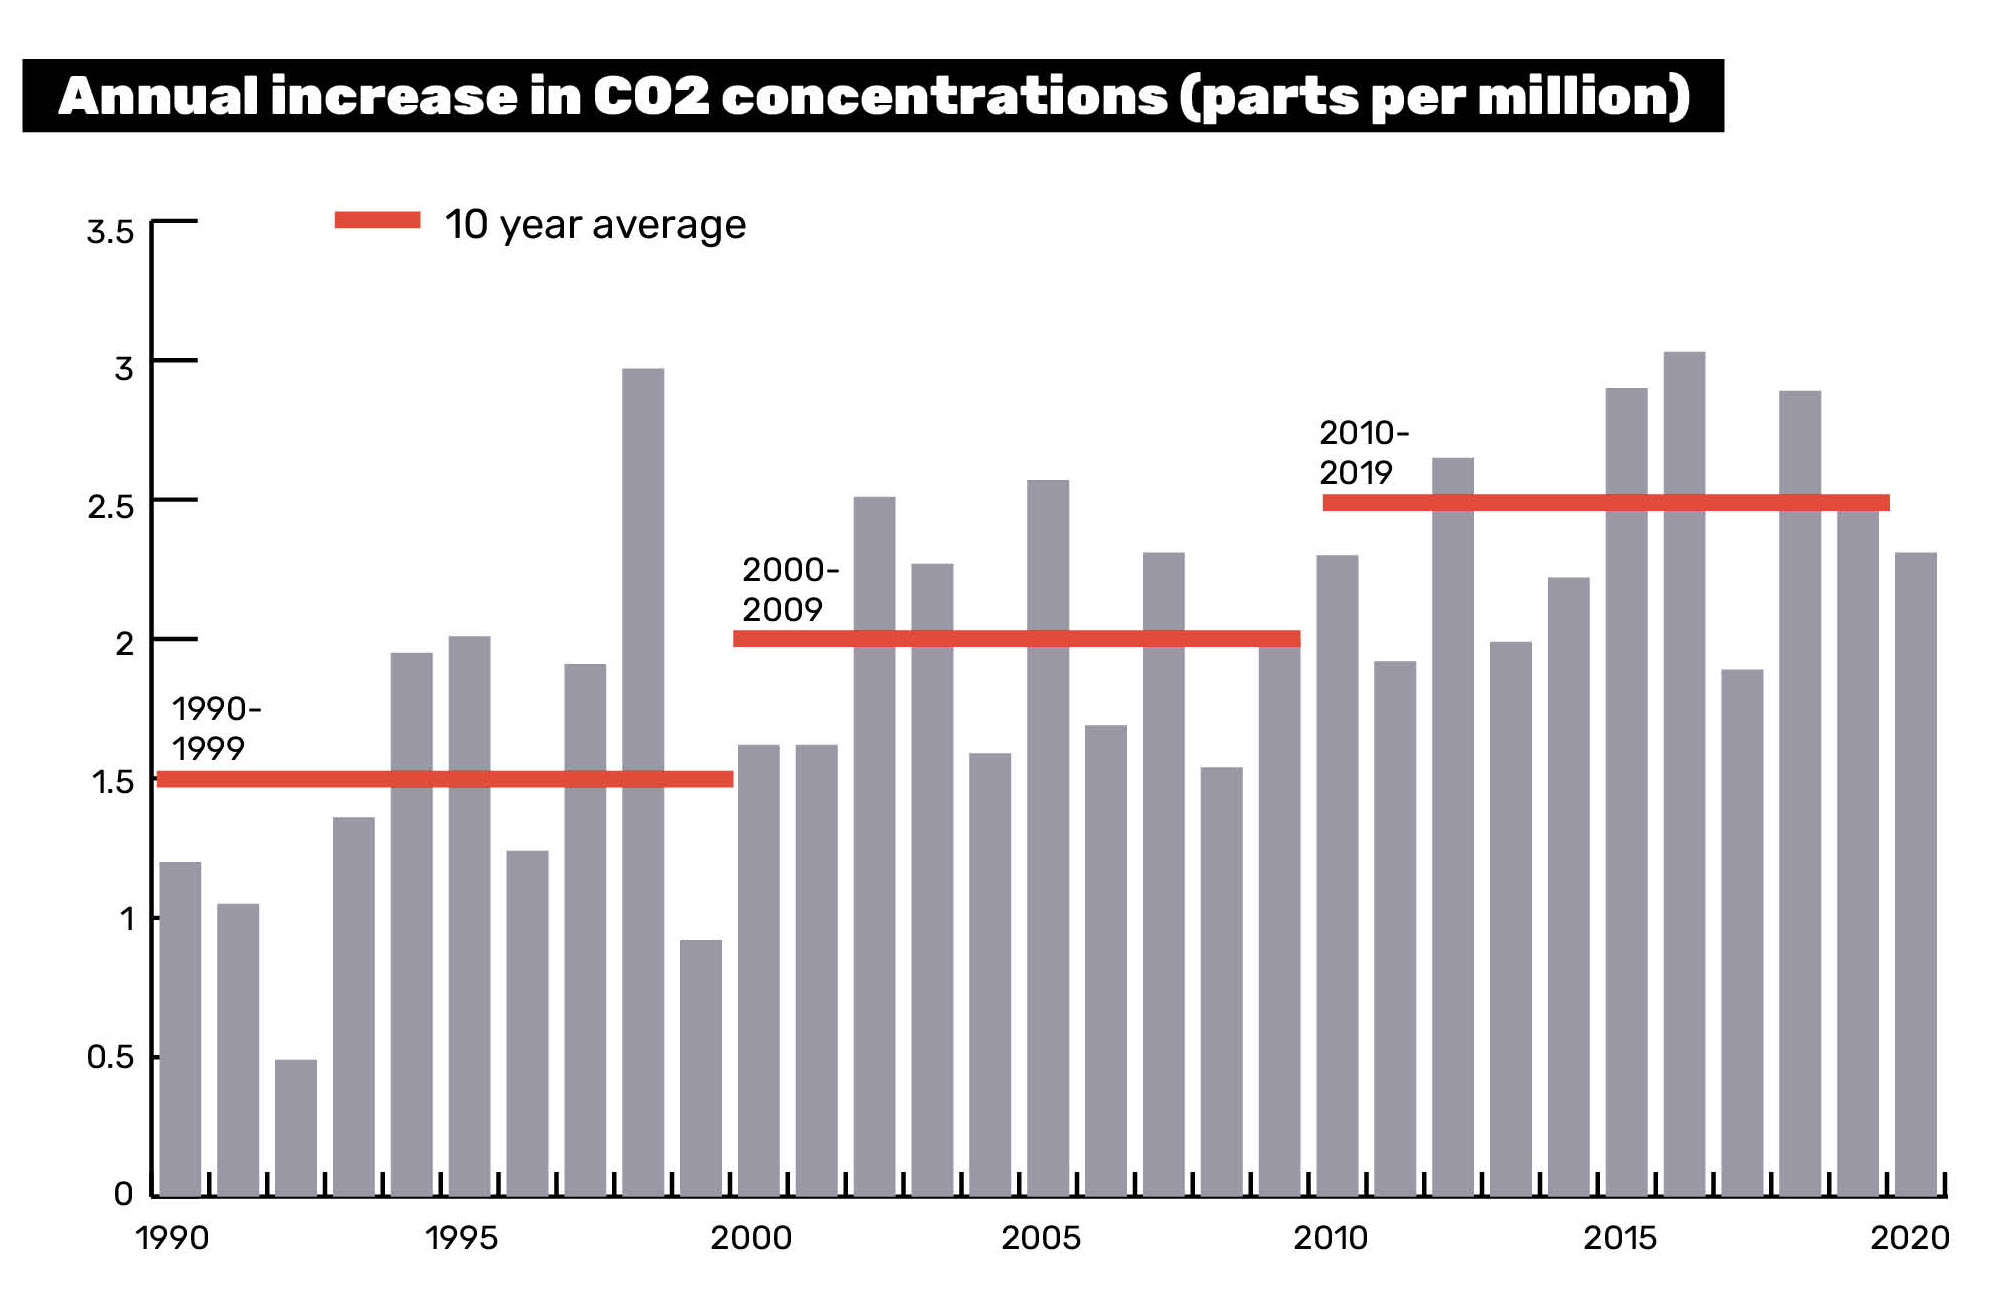 Graph showing annual increase in CO2 concentrations in the atmosphere from 1990-2020